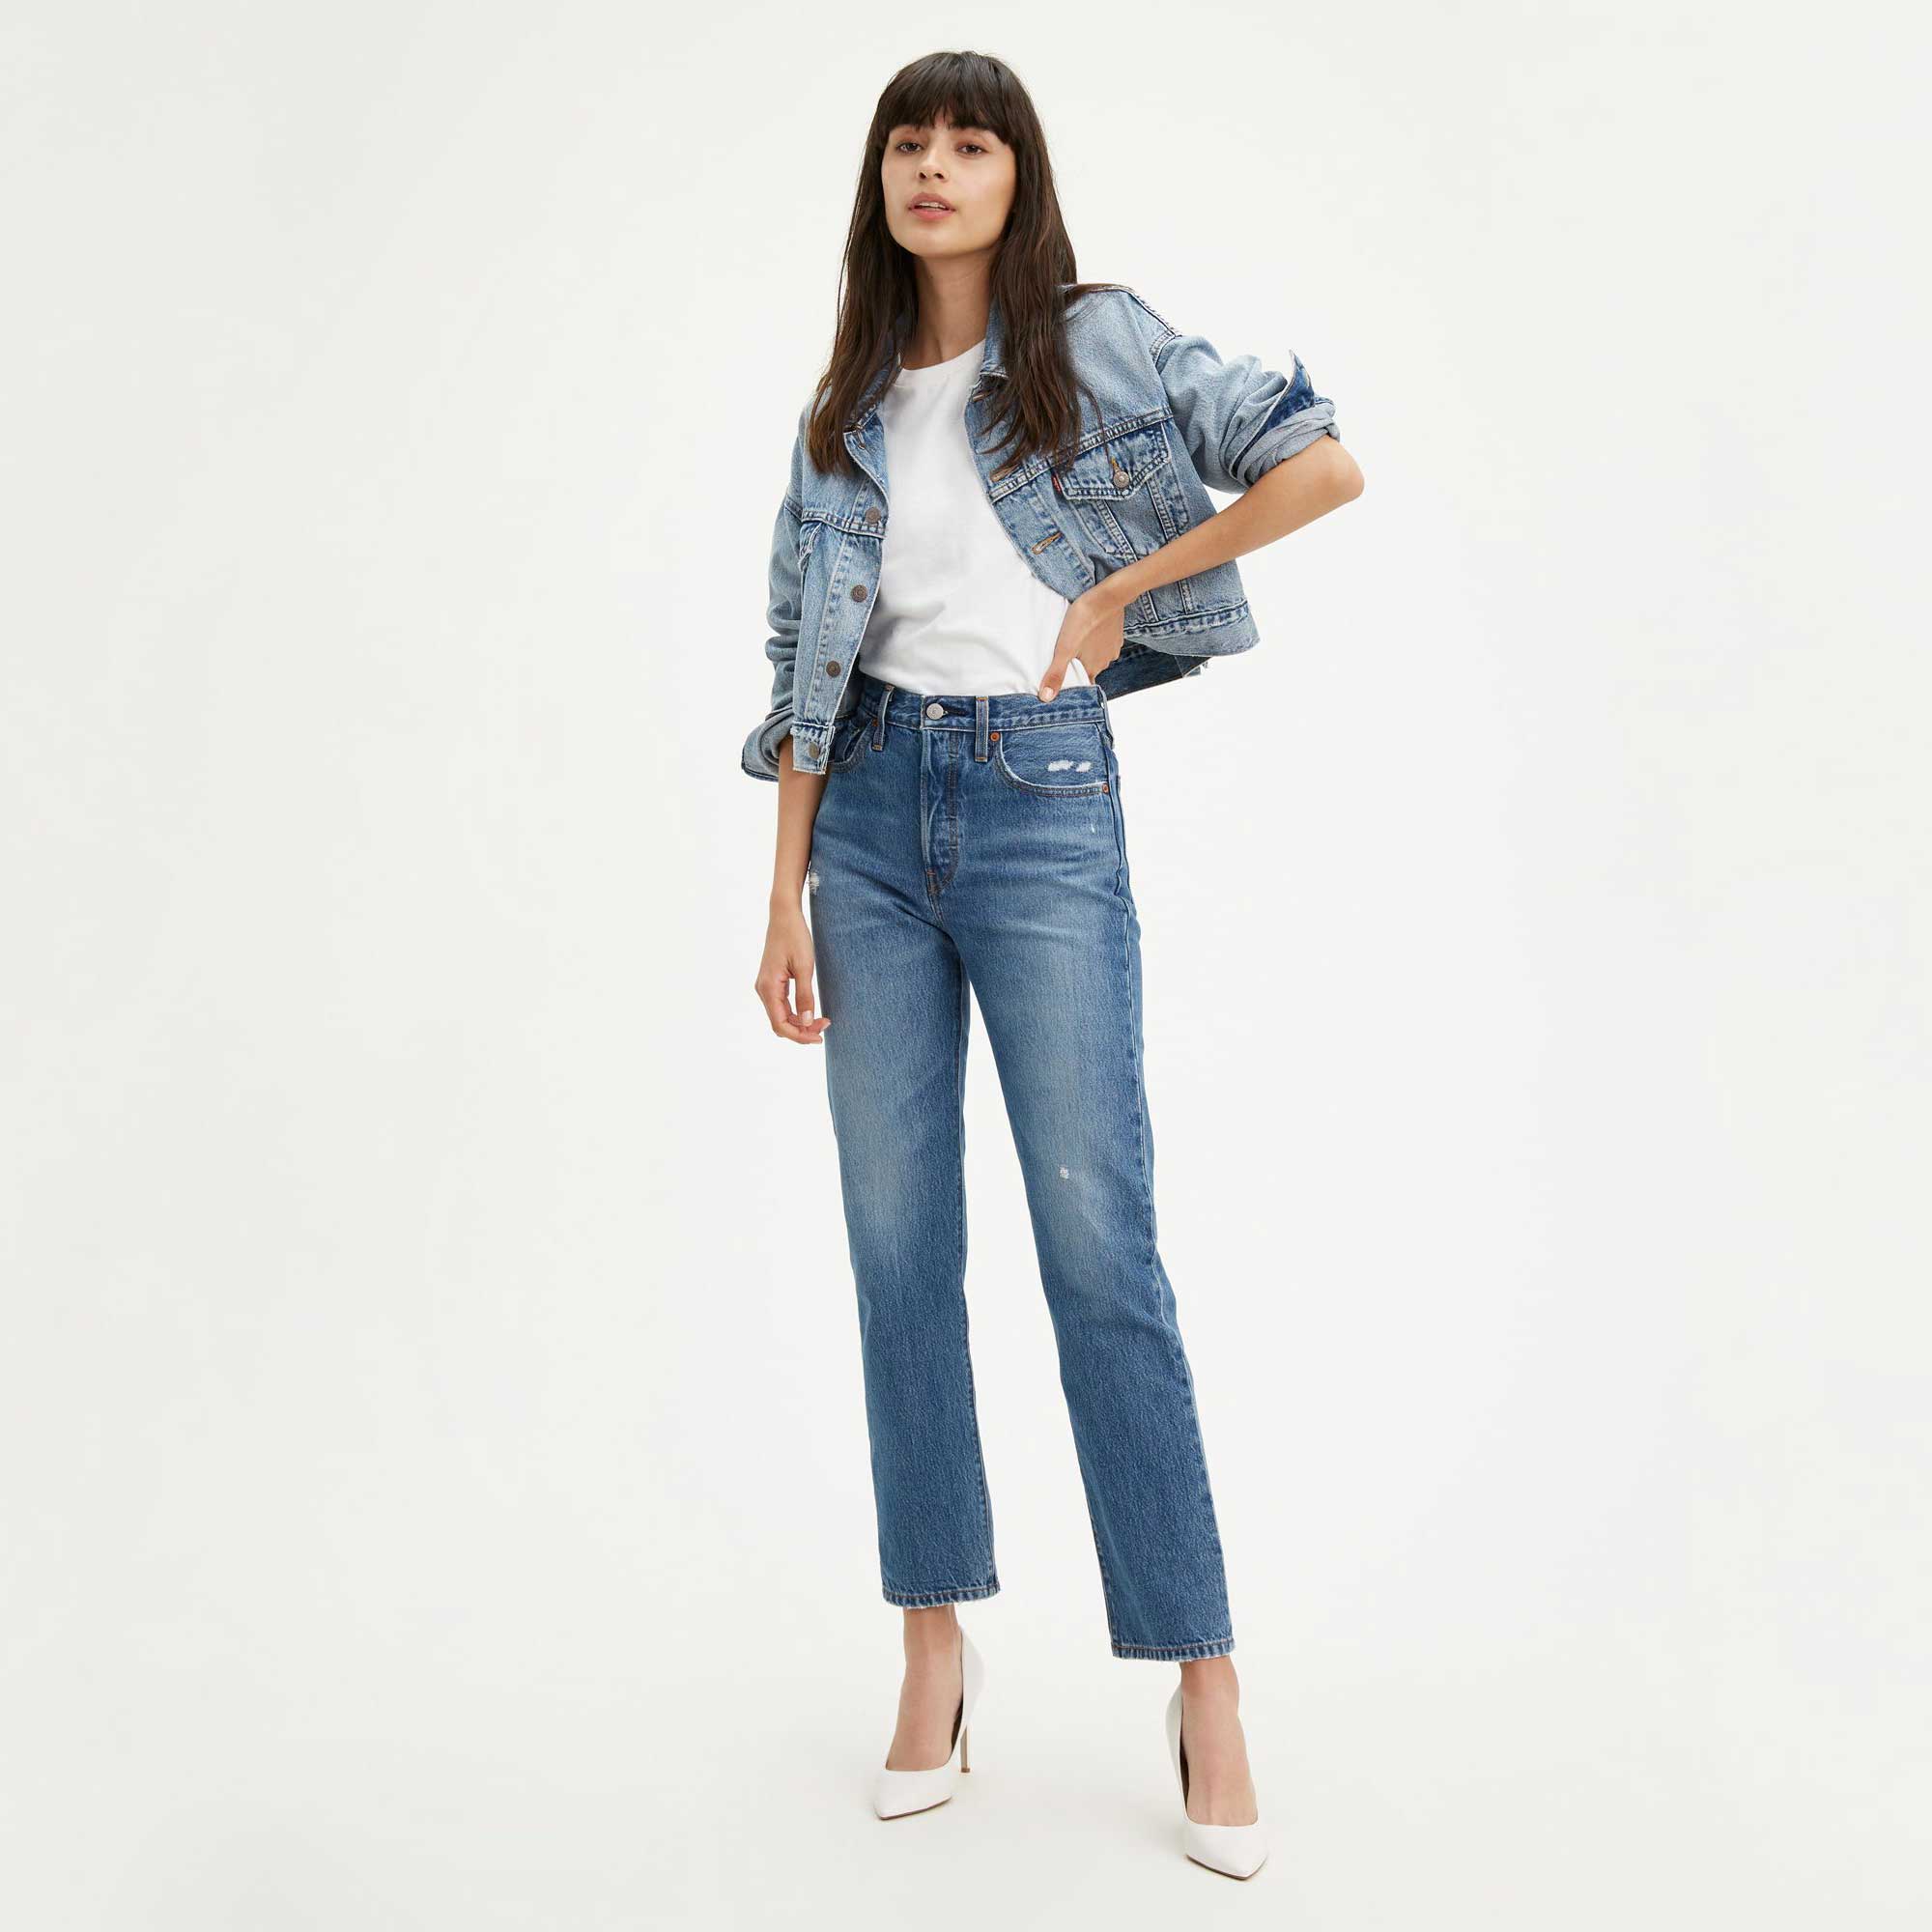 Levi's 501 Jeans For Women – Norwood